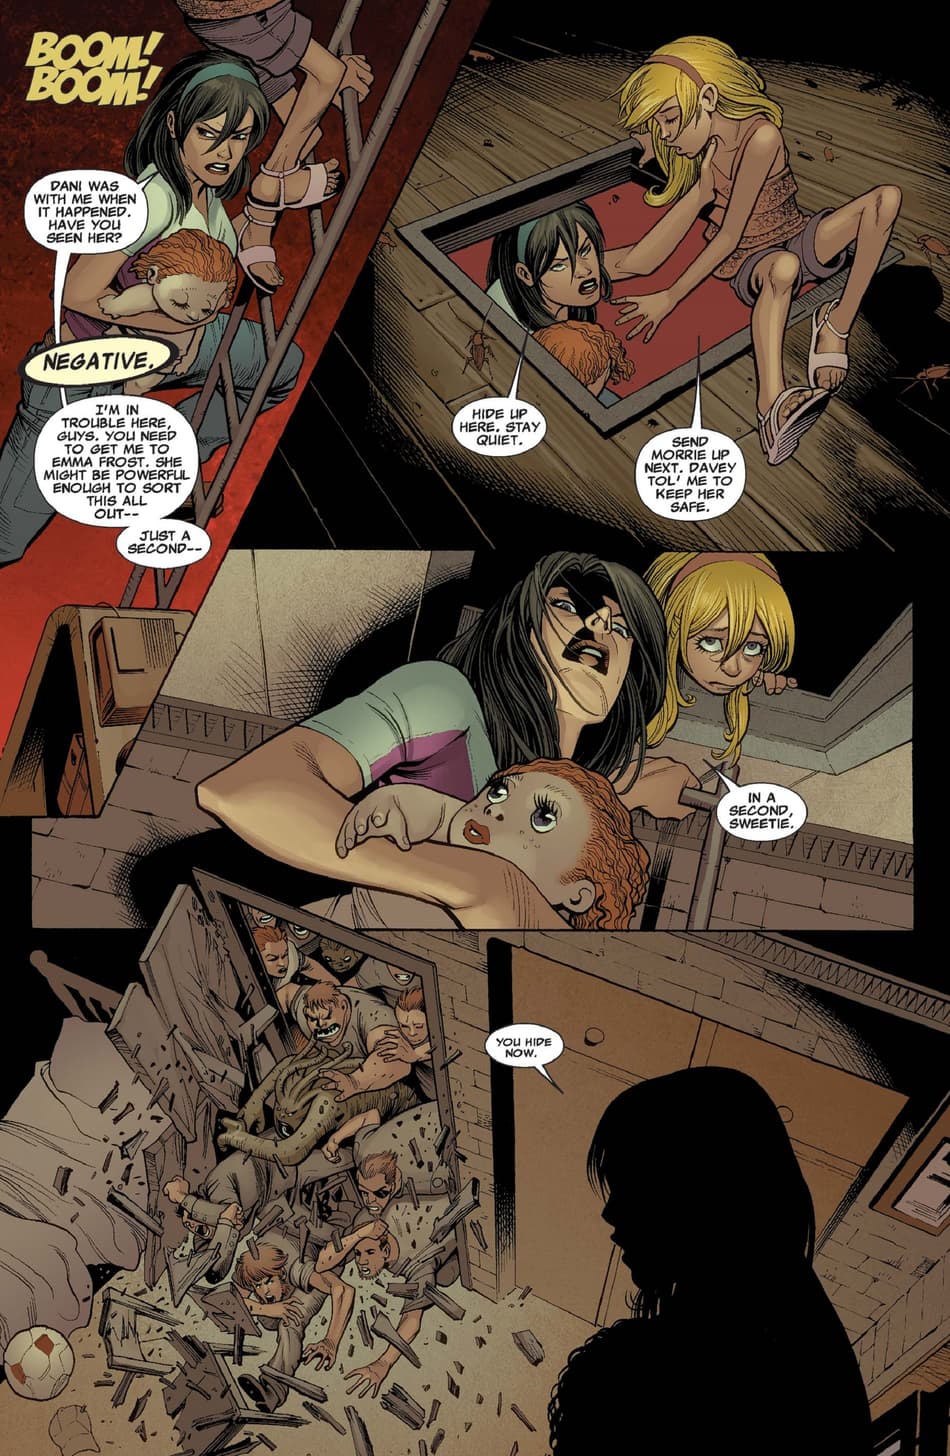 Karma protects Marci from Legion's demons in NEW MUTANTS (2009) #2.